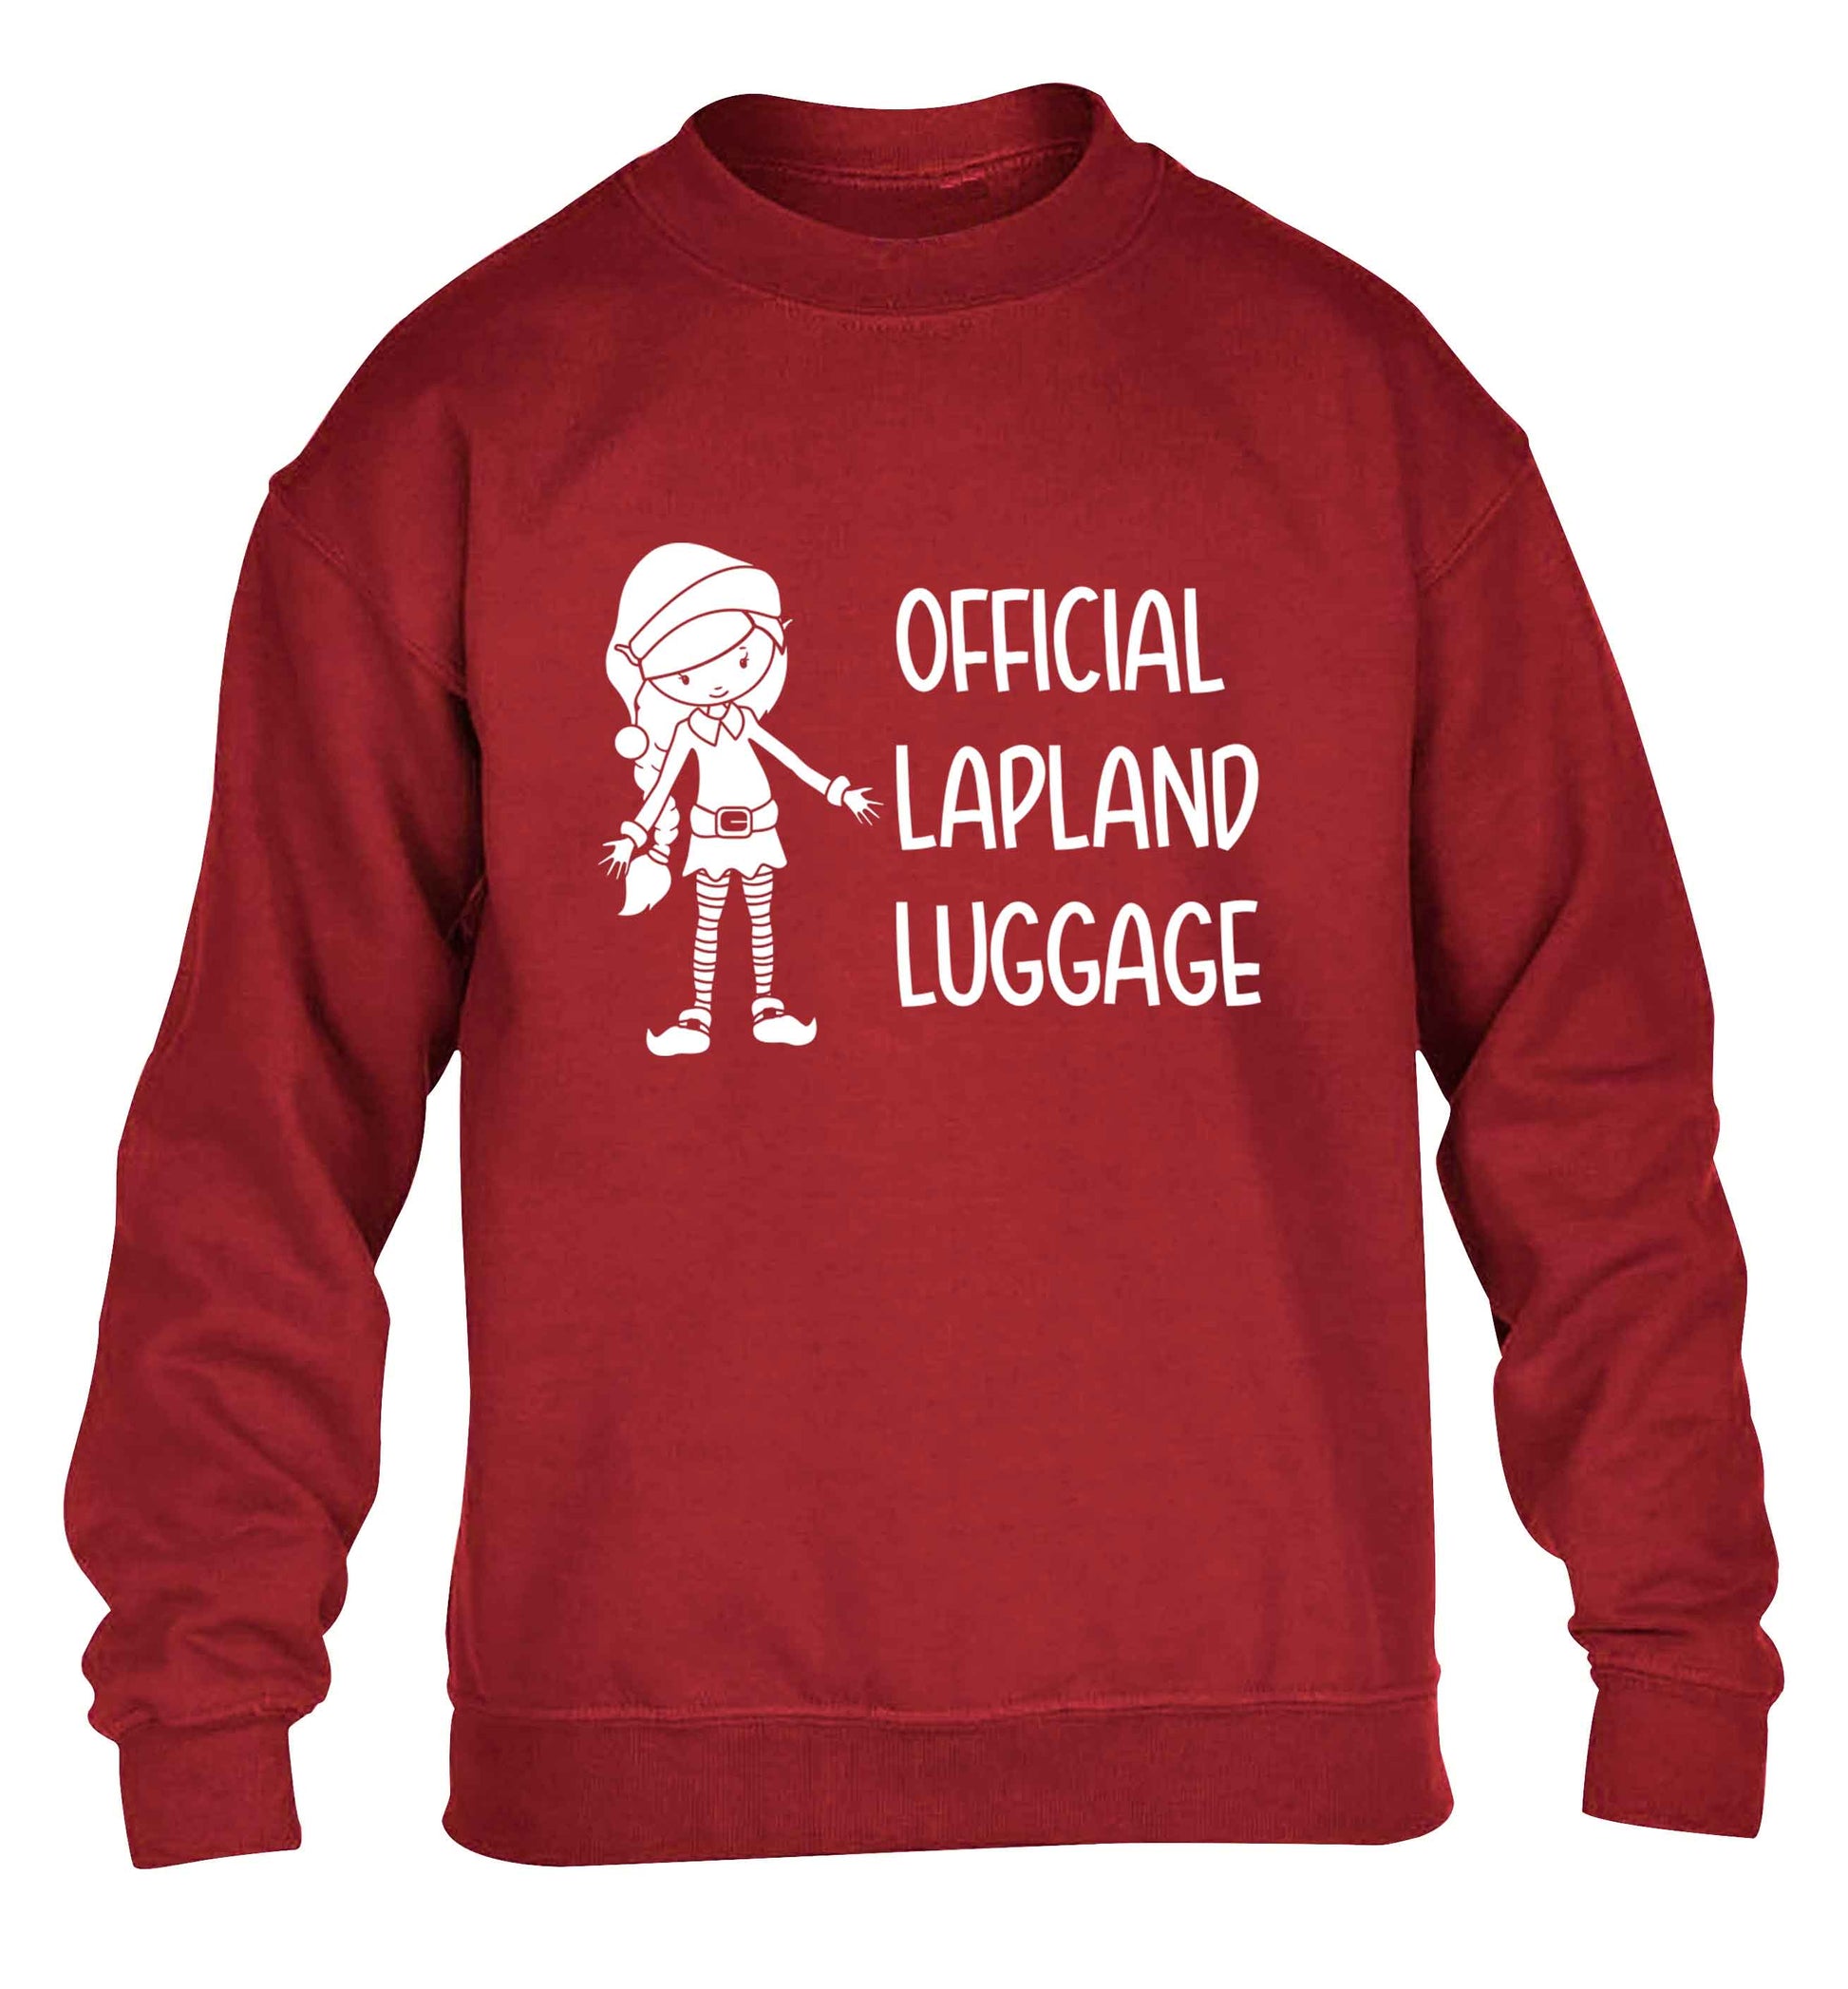 Official lapland luggage - Elf snowflake children's grey sweater 12-13 Years